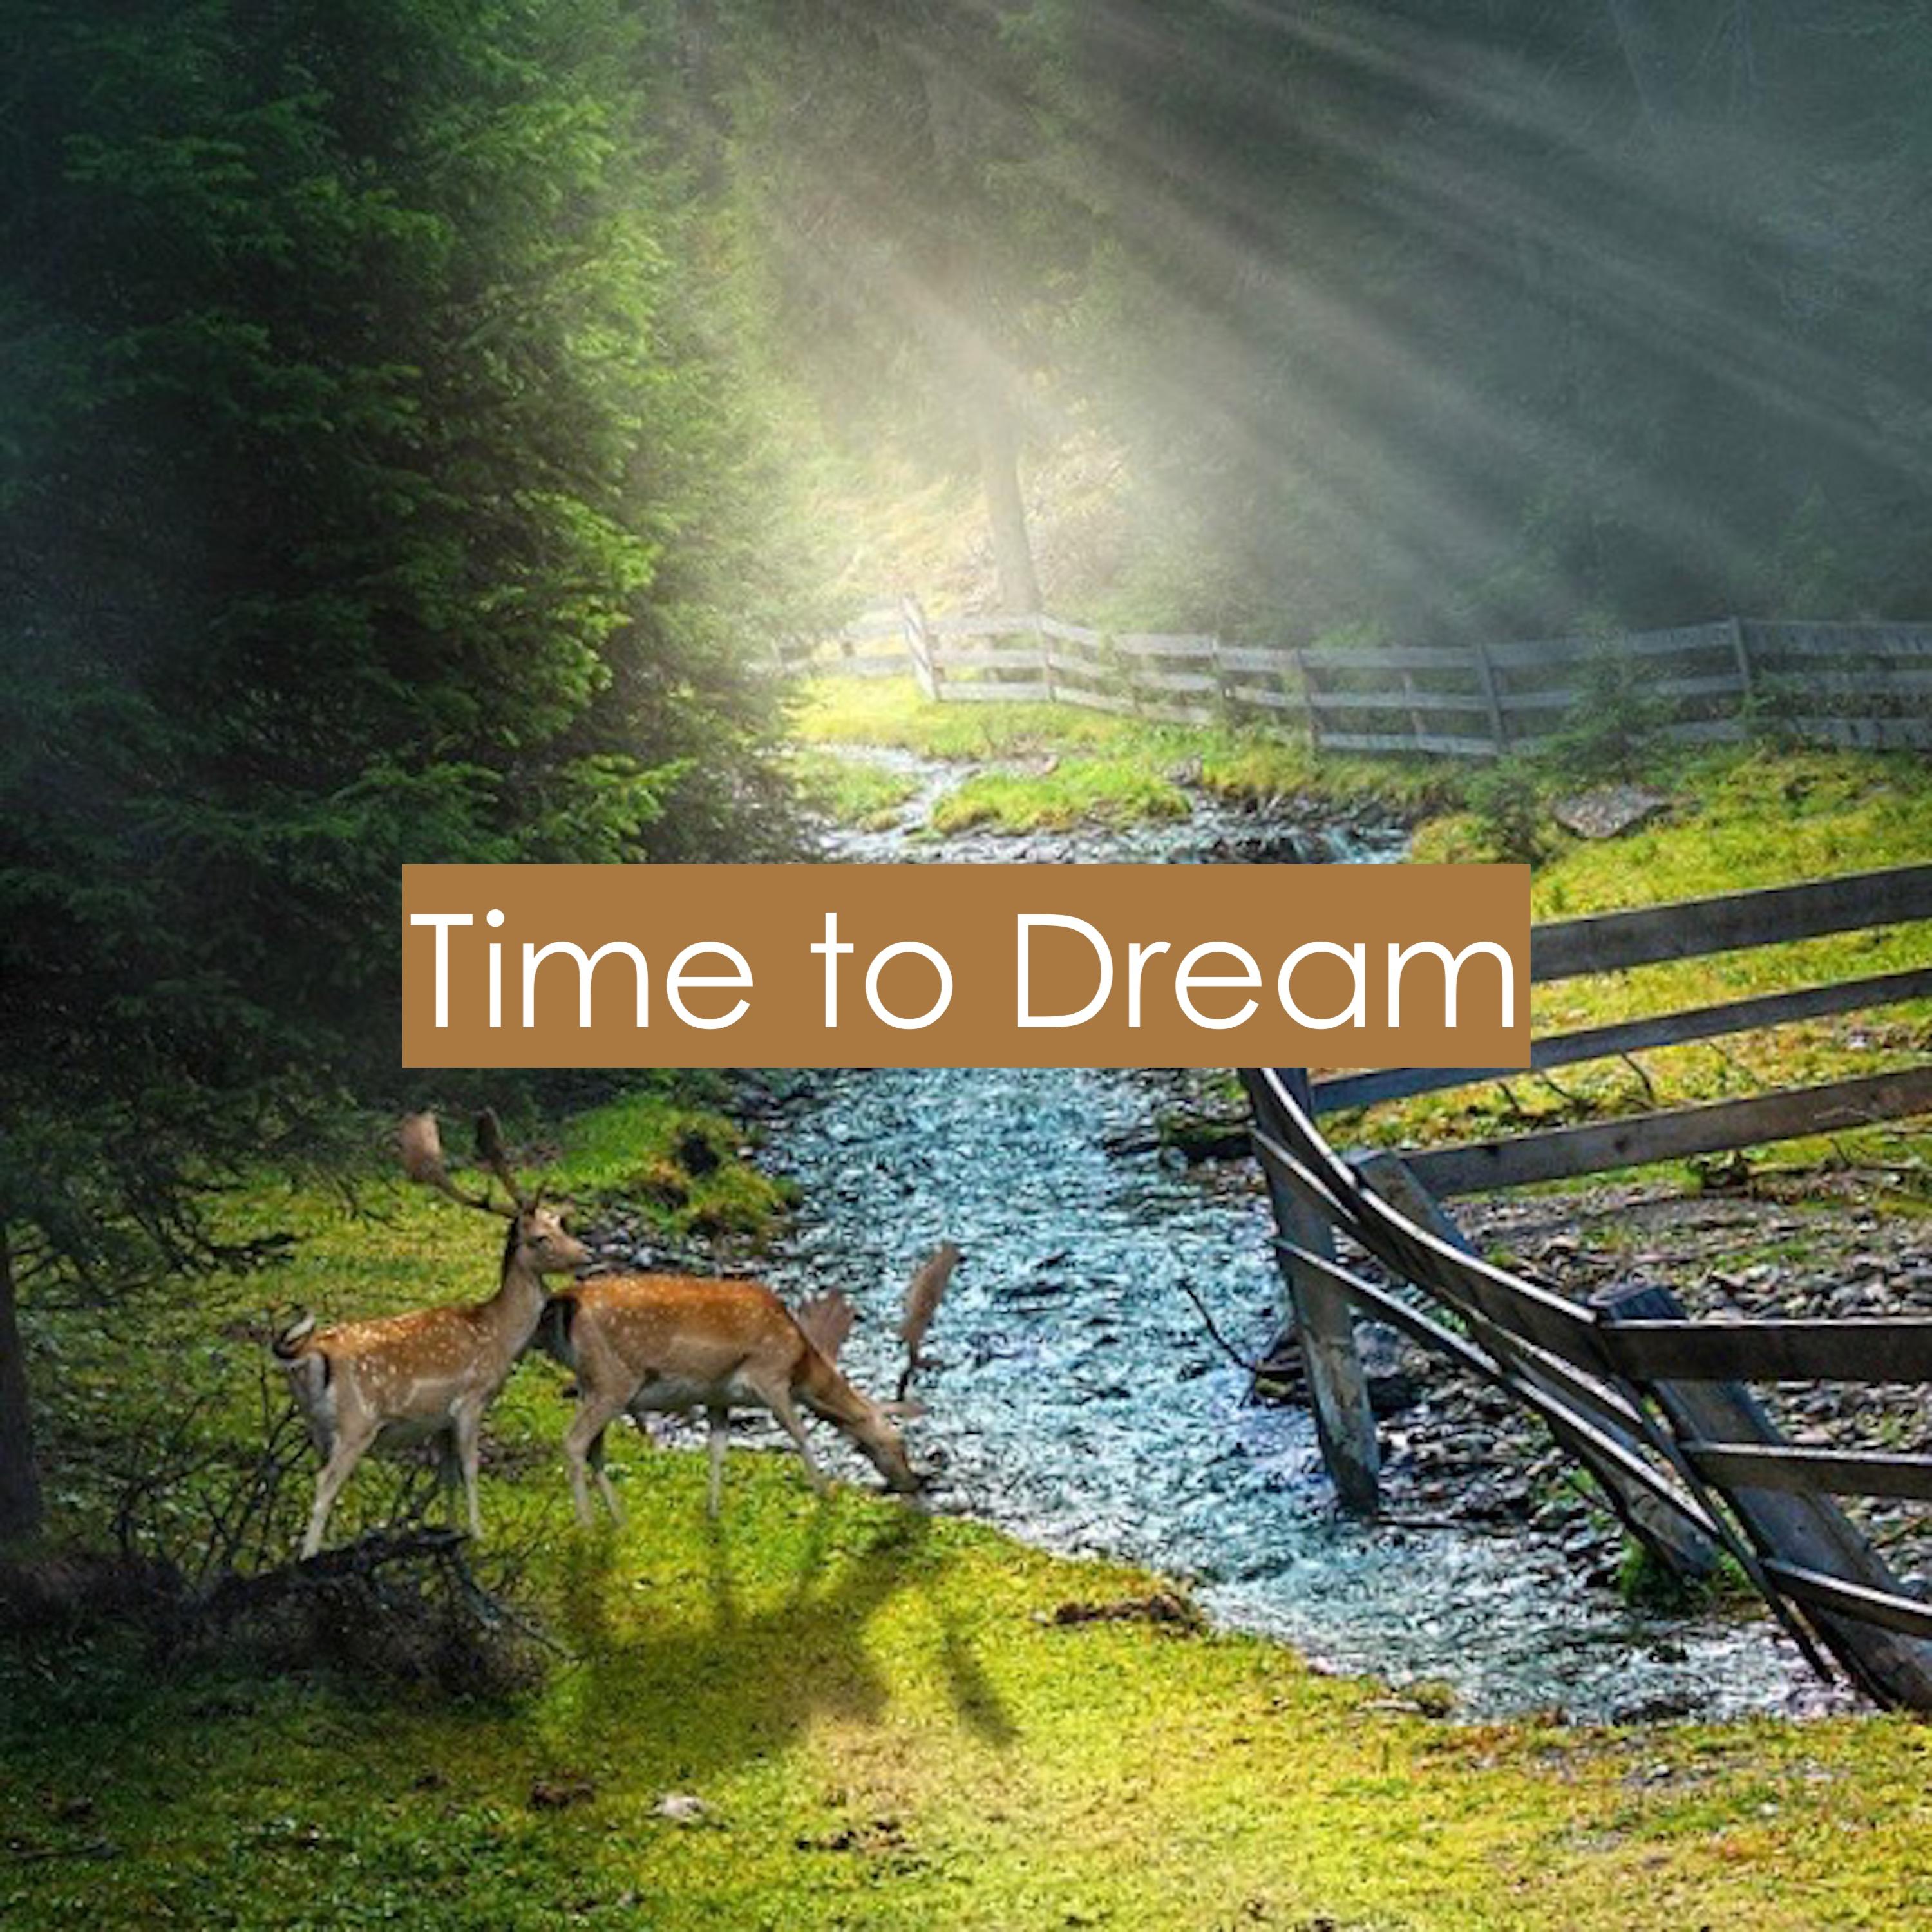 #2018 A Time to Dream: 15 Loopable Nature Rain Sounds for Sleep and Dreaming